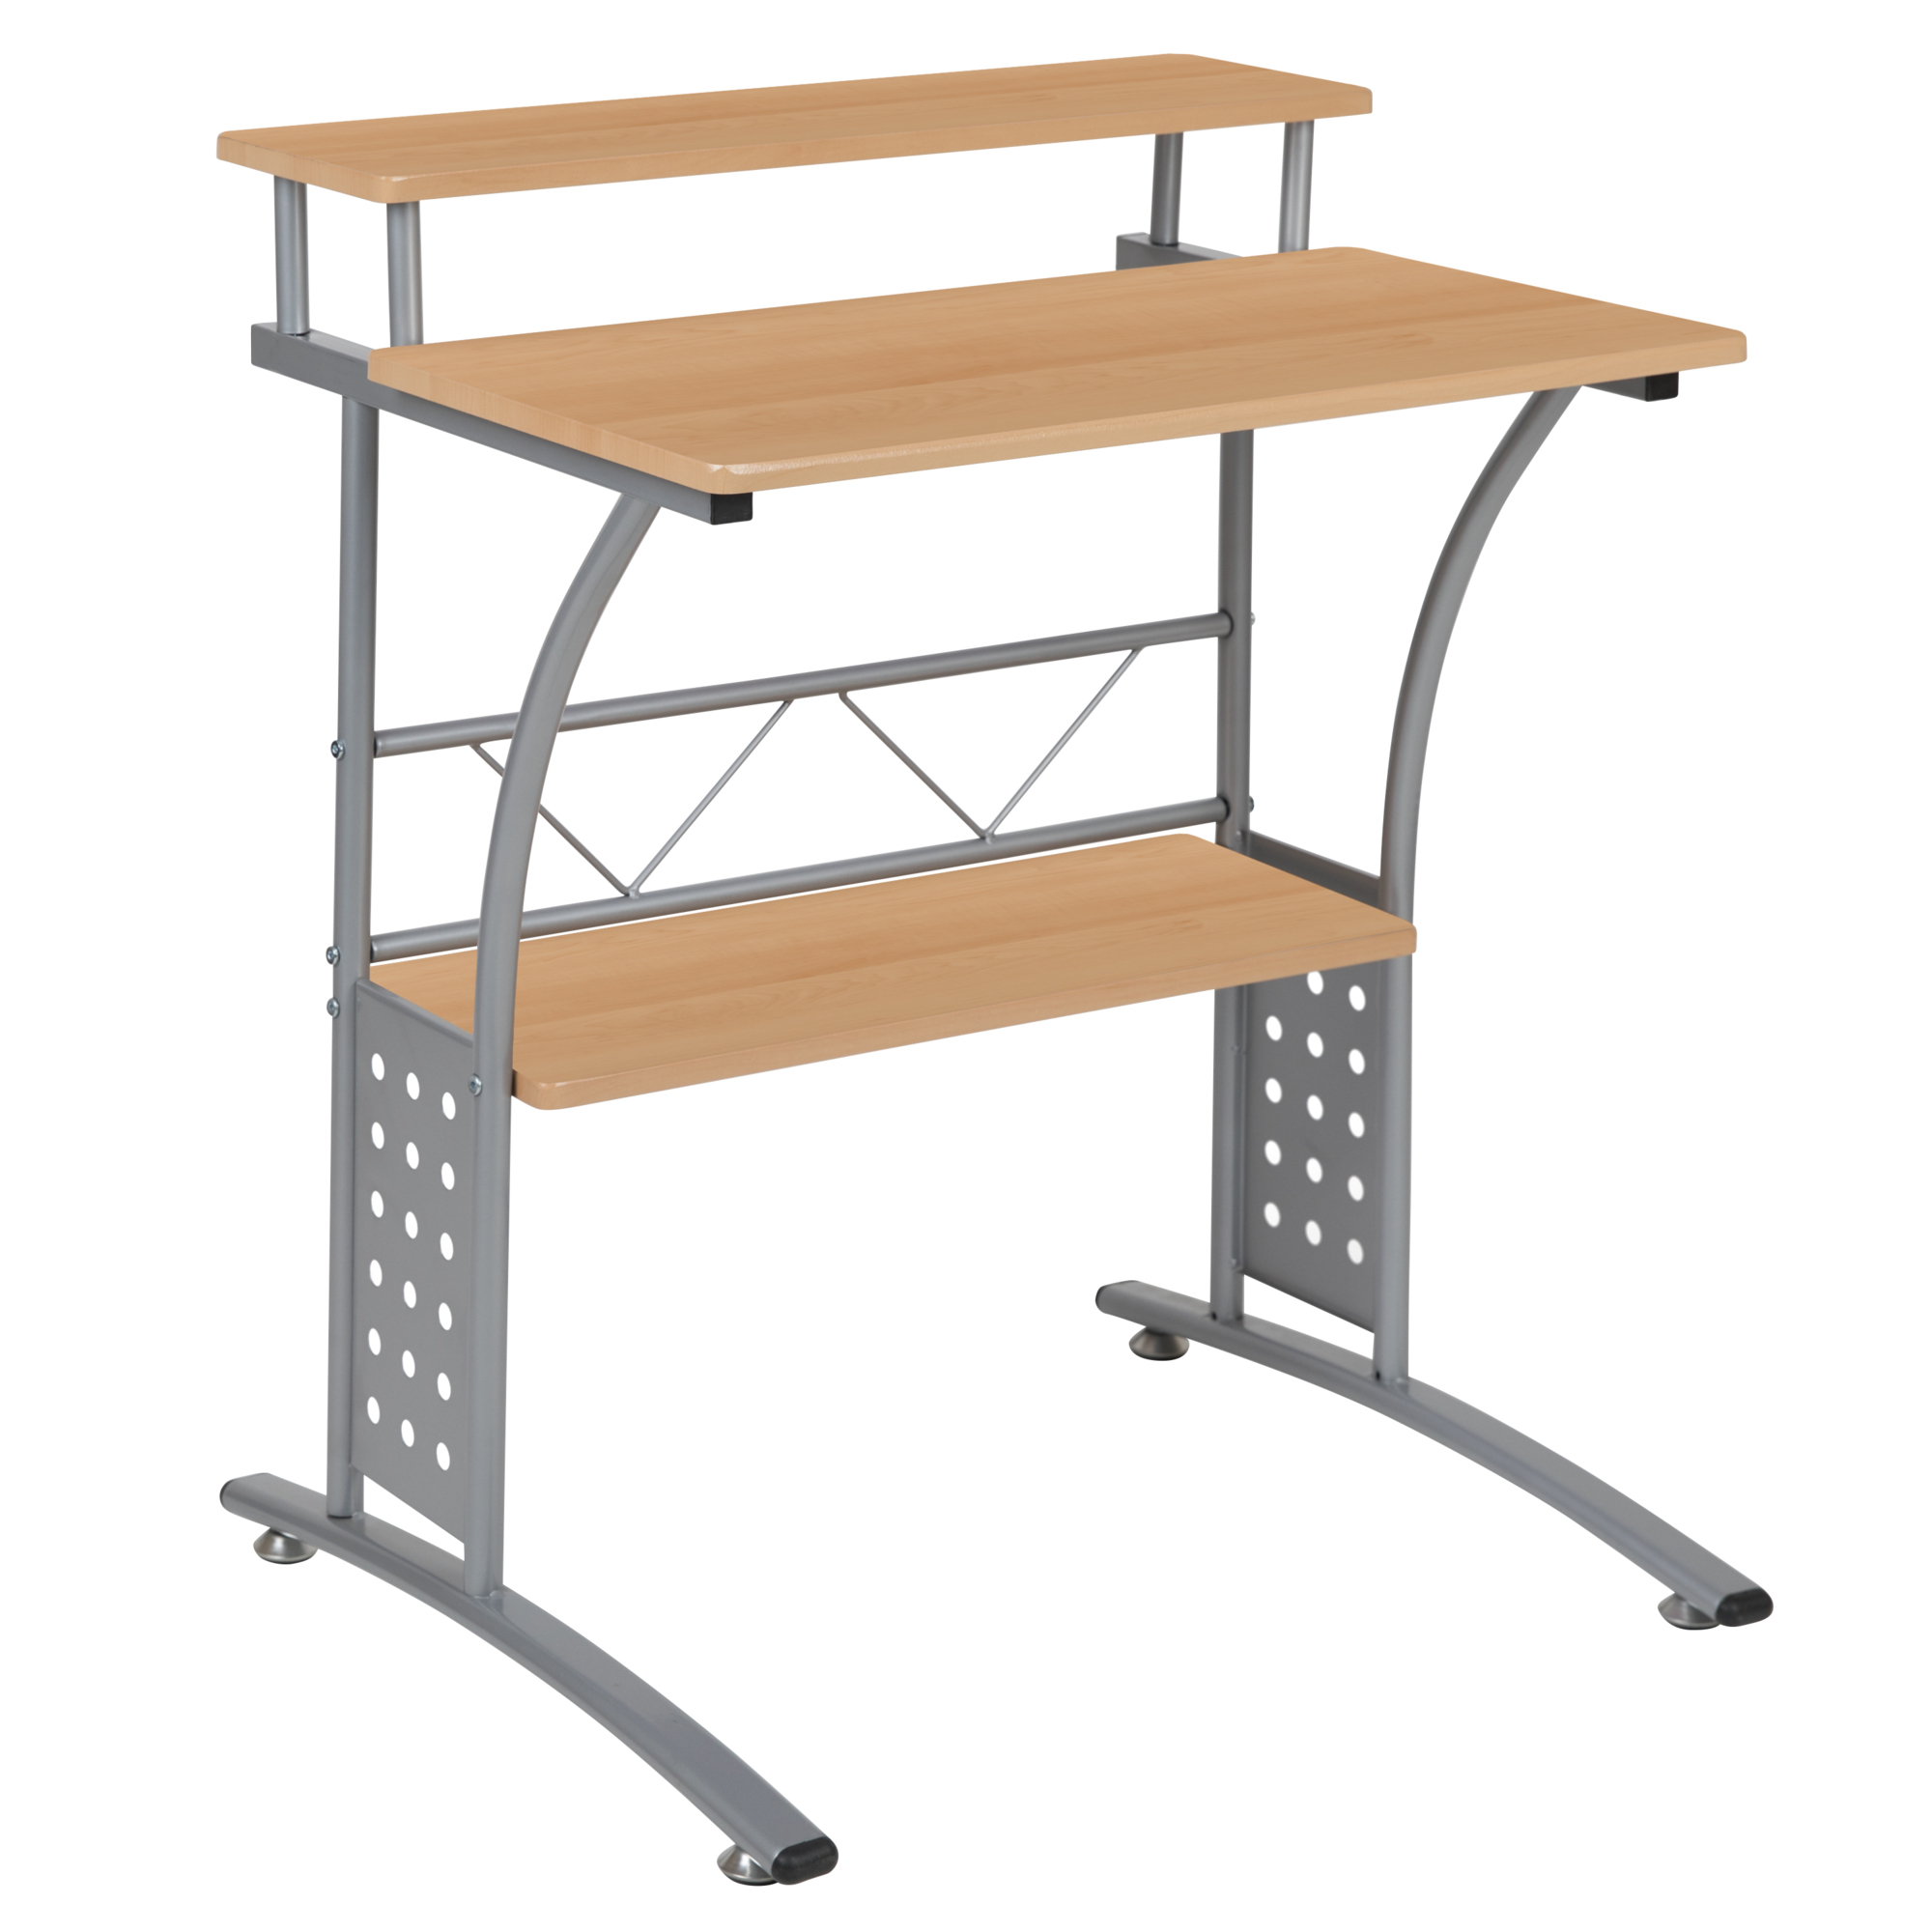 Flash Furniture, Maple Computer Desk with Top and Lower Shelves, Width 28 in, Height 33 in, Depth 23.5 in, Model NANCLIFTONMP